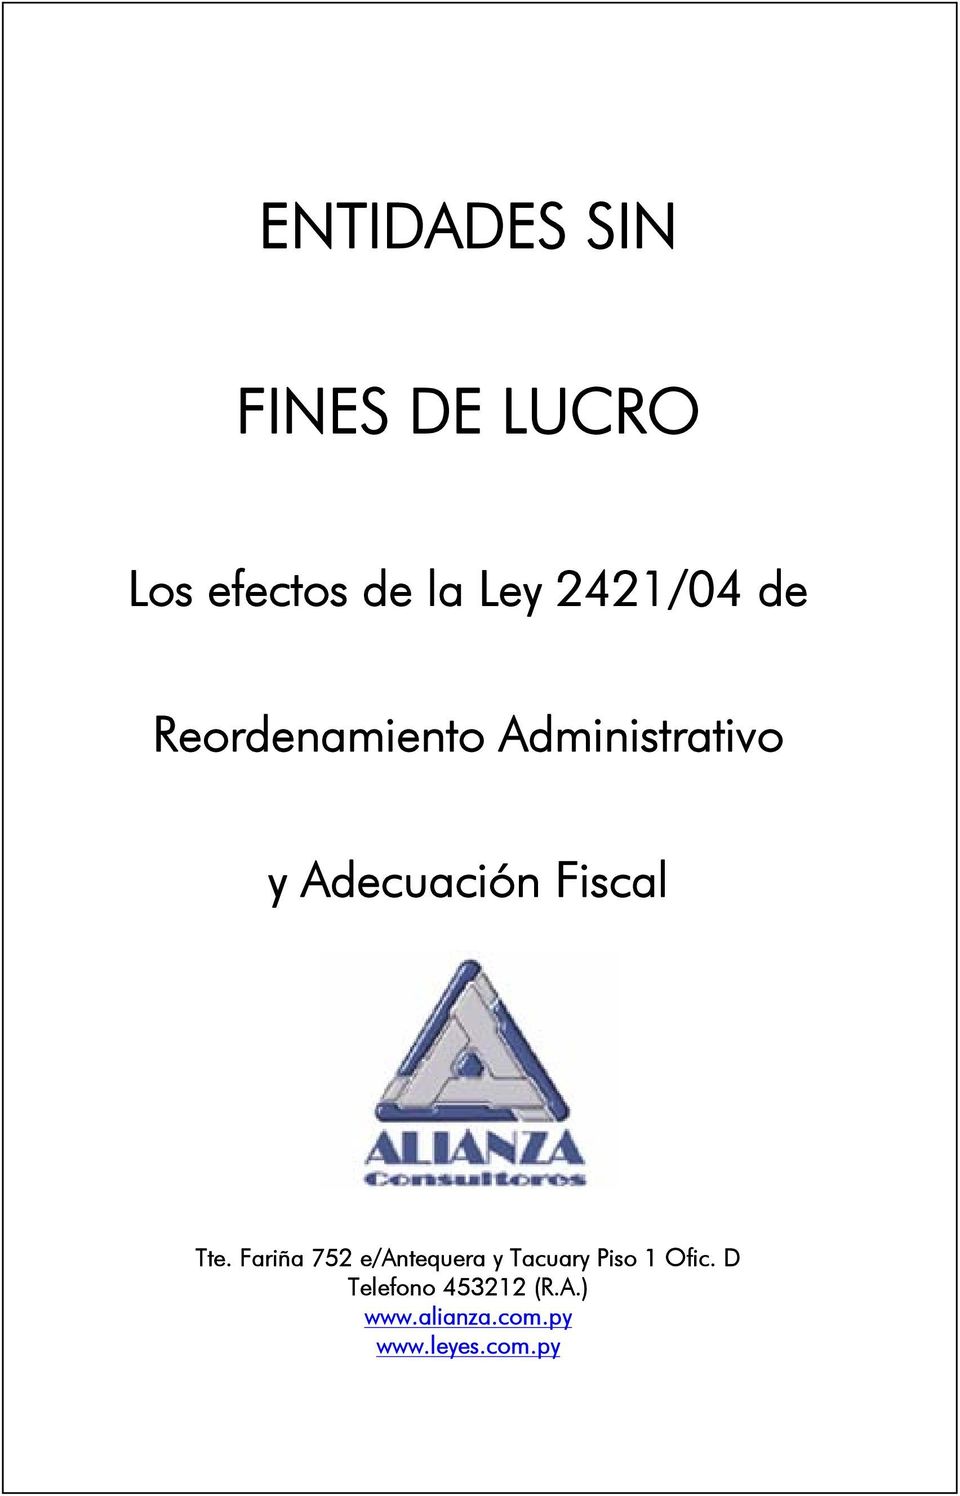 Fiscal Tte.